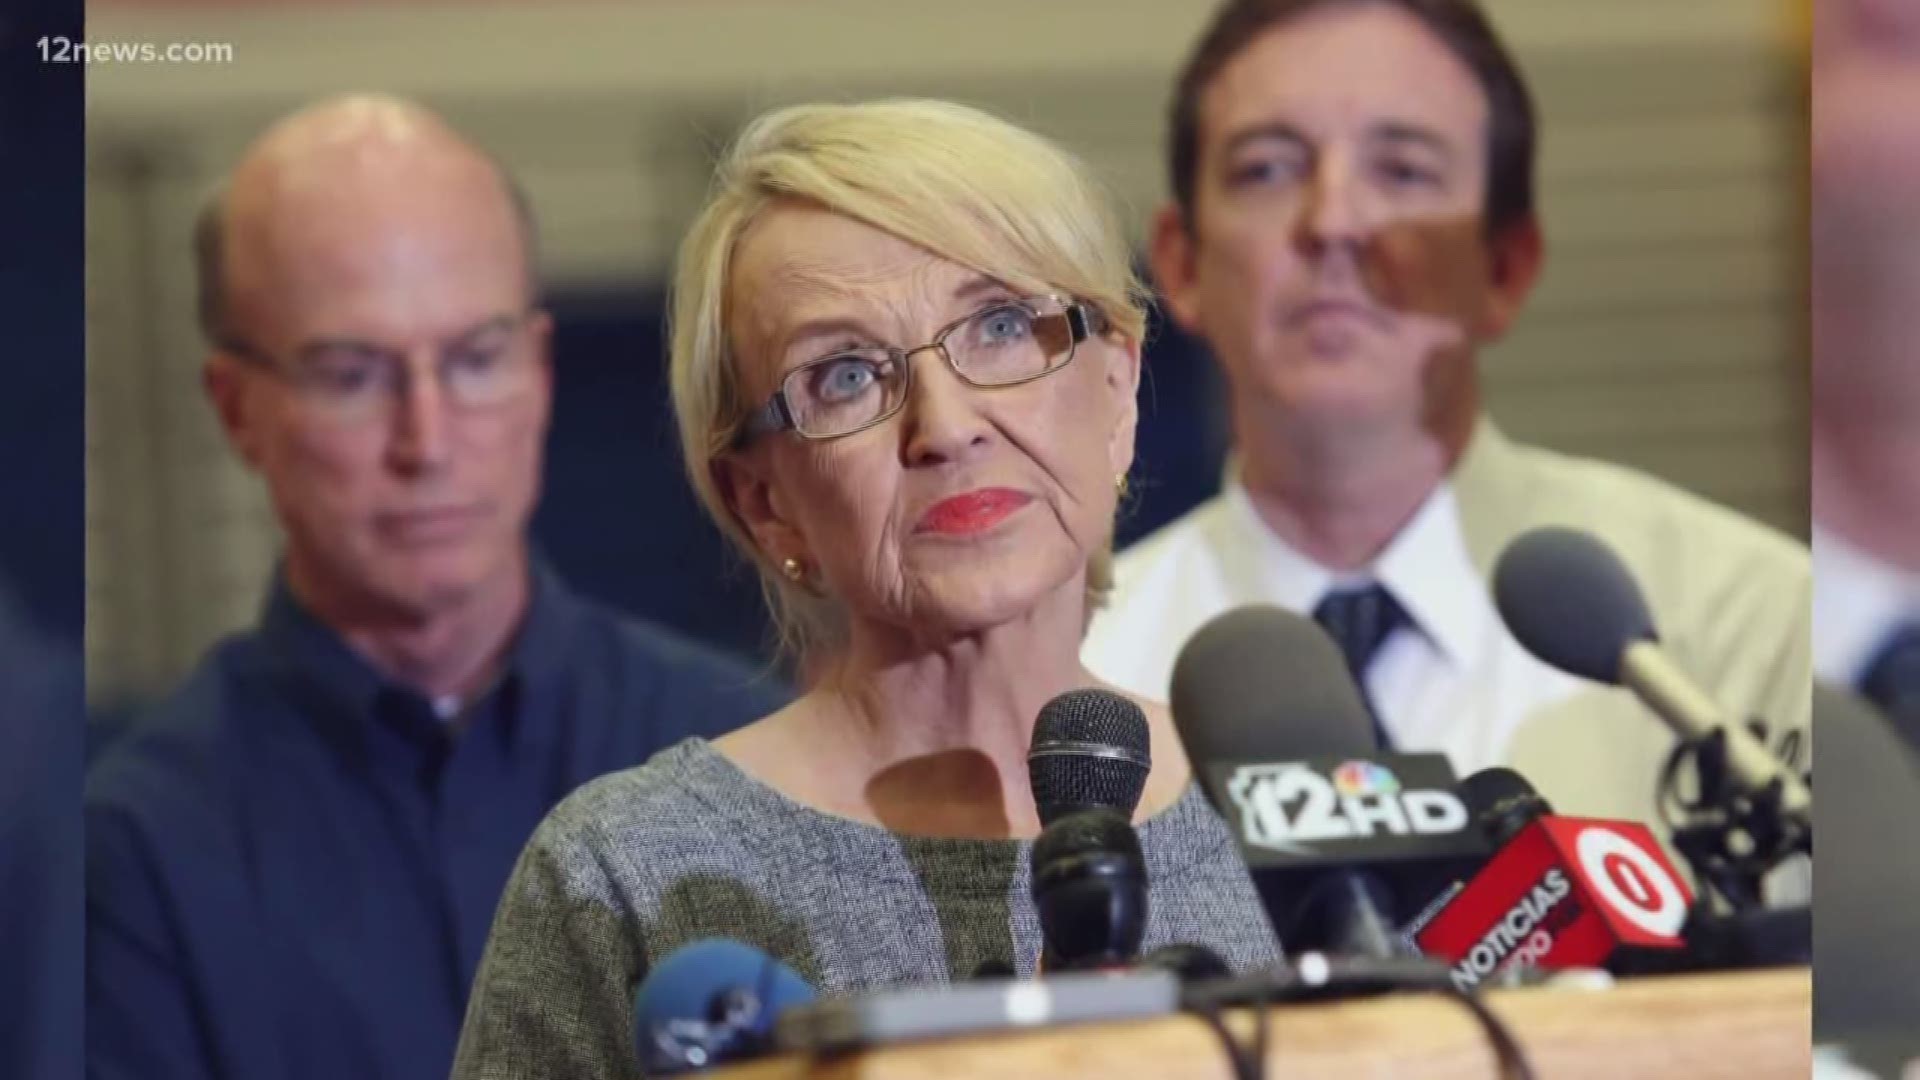 Former Arizona Governor Jan Brewer is the latest politician to be targeted by the comedian.